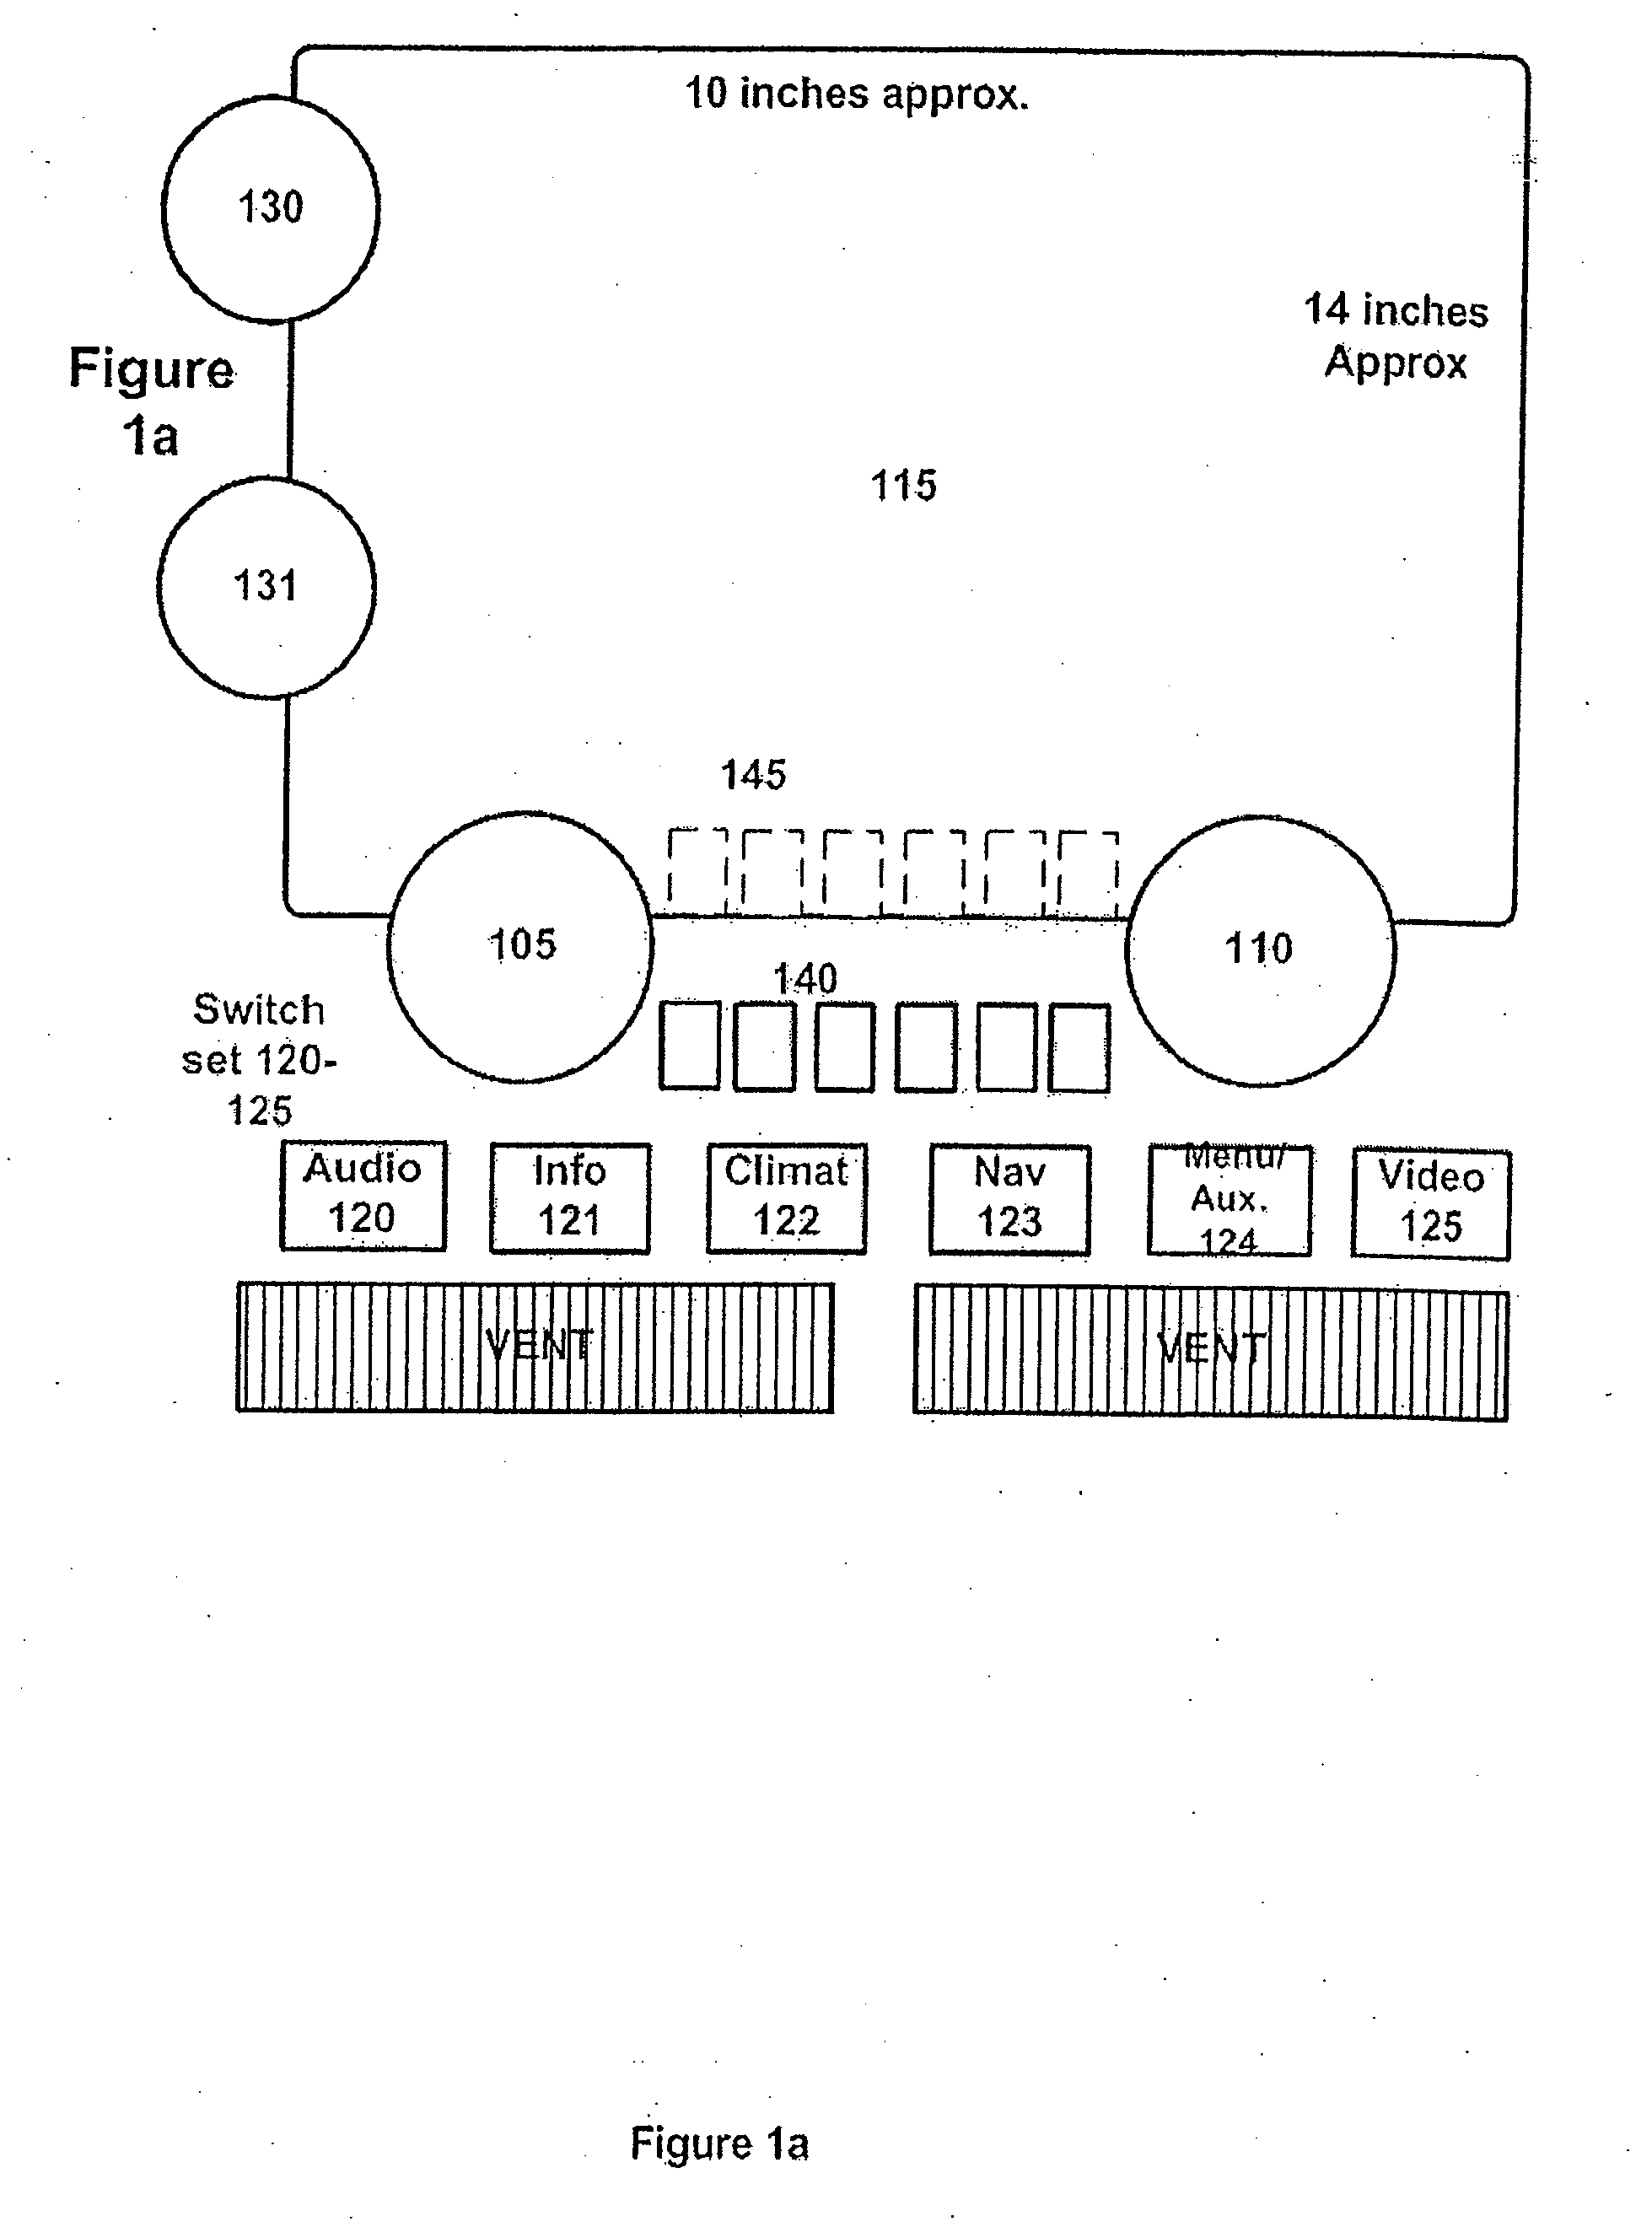 Method and apparatus employing multi-functional controls and displays